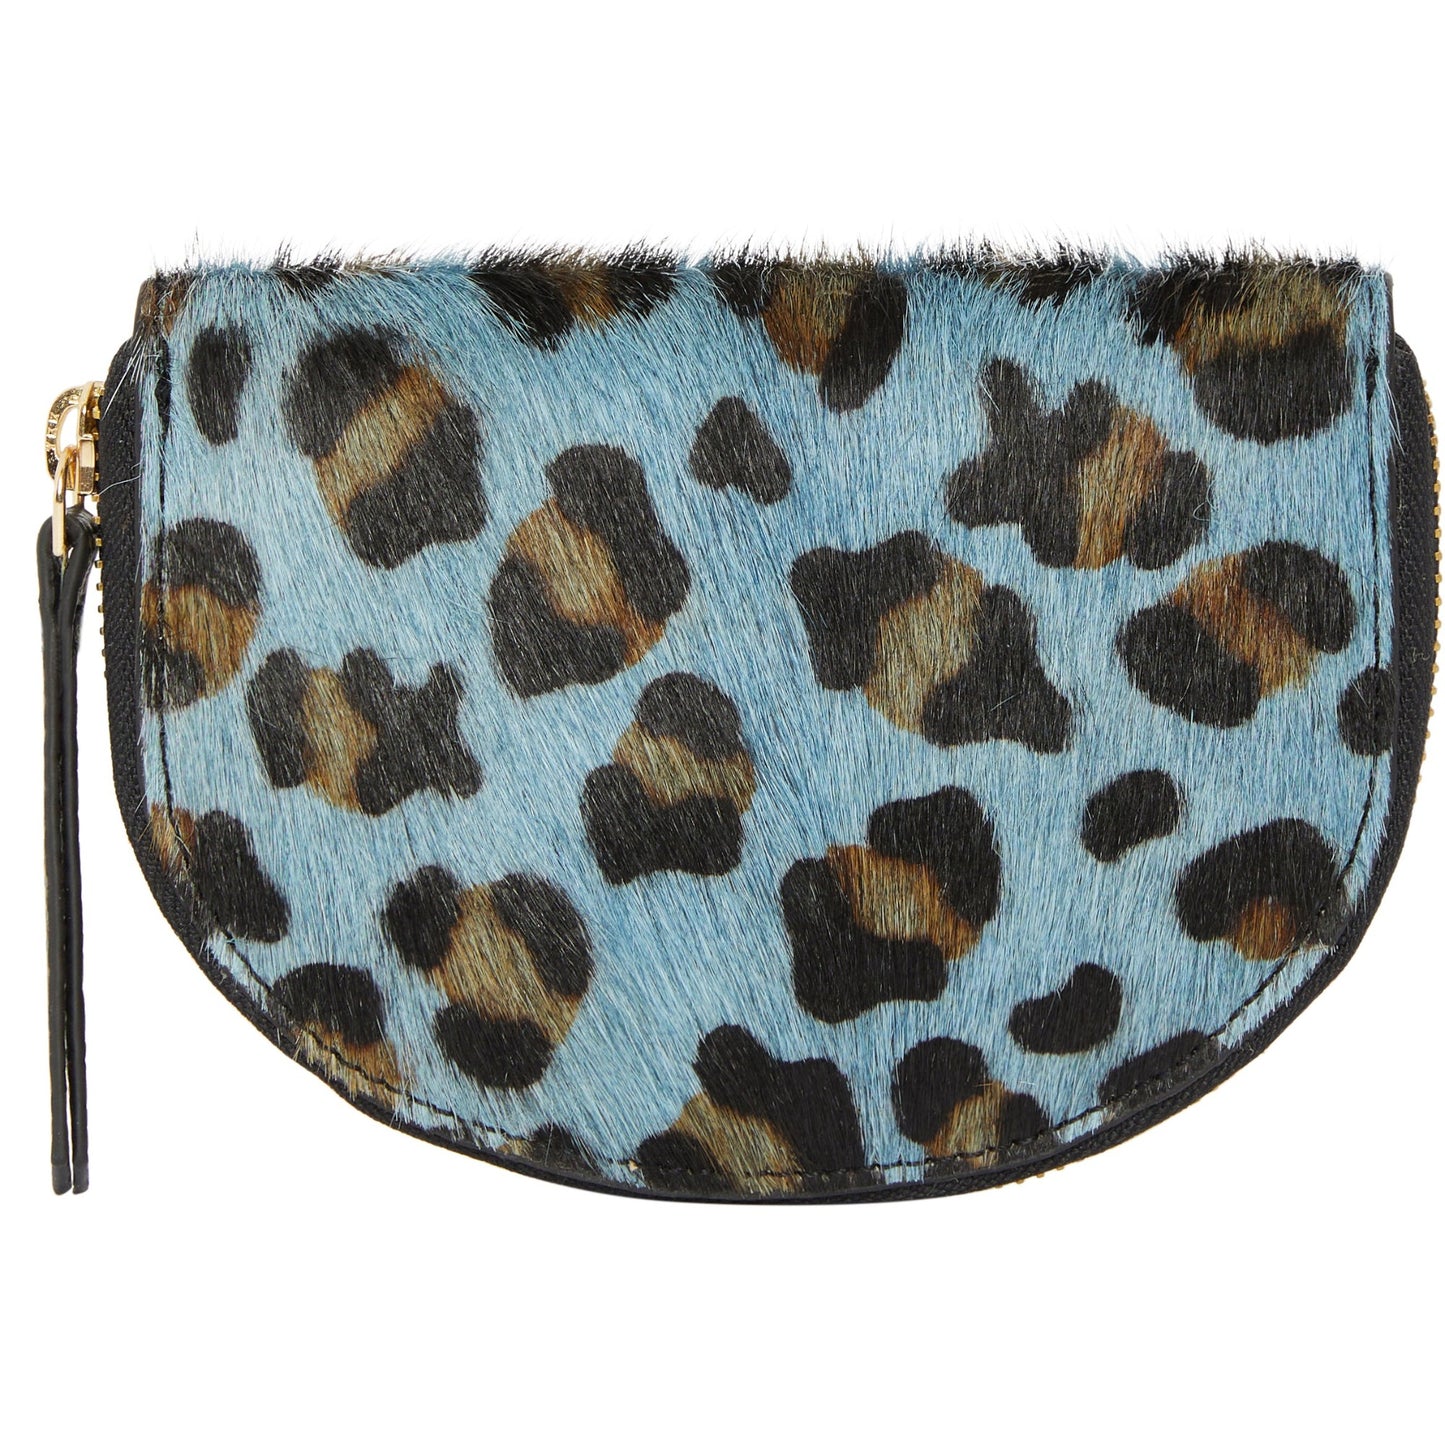 Blue Animal Print Leather Zip Around Half Moon Purse Brix and Bailey Ethical Brand